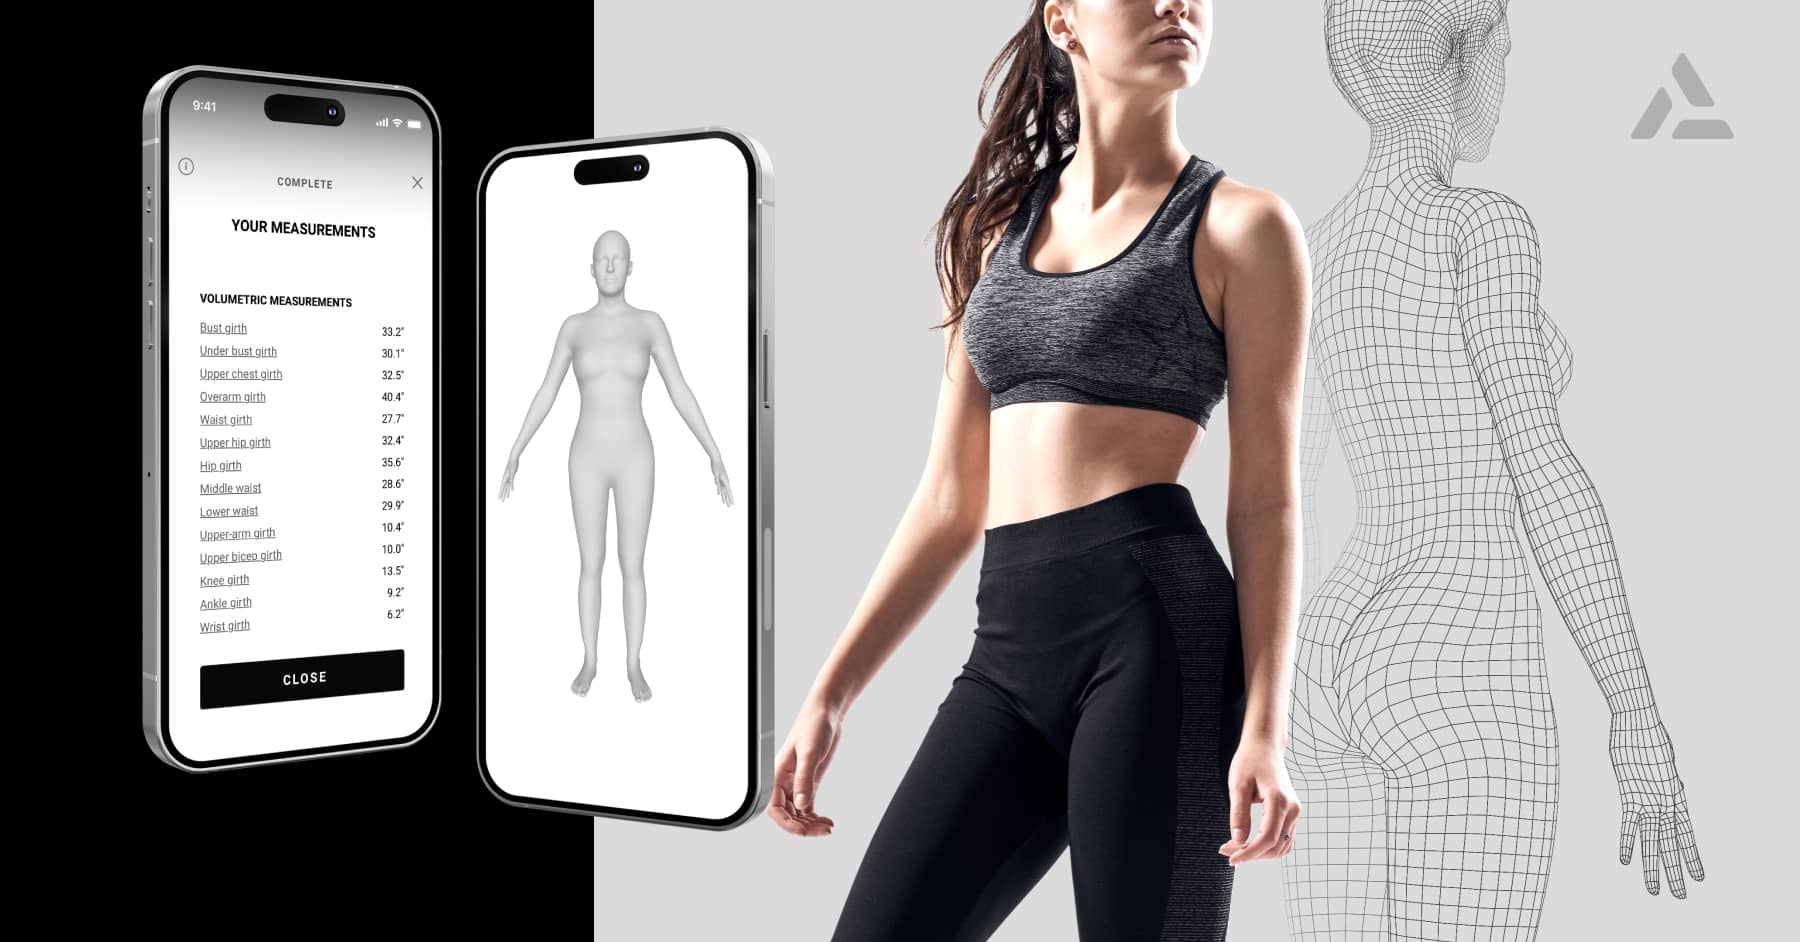 The woman's body is displayed on a smartphone in a custom fit fashion retail app.